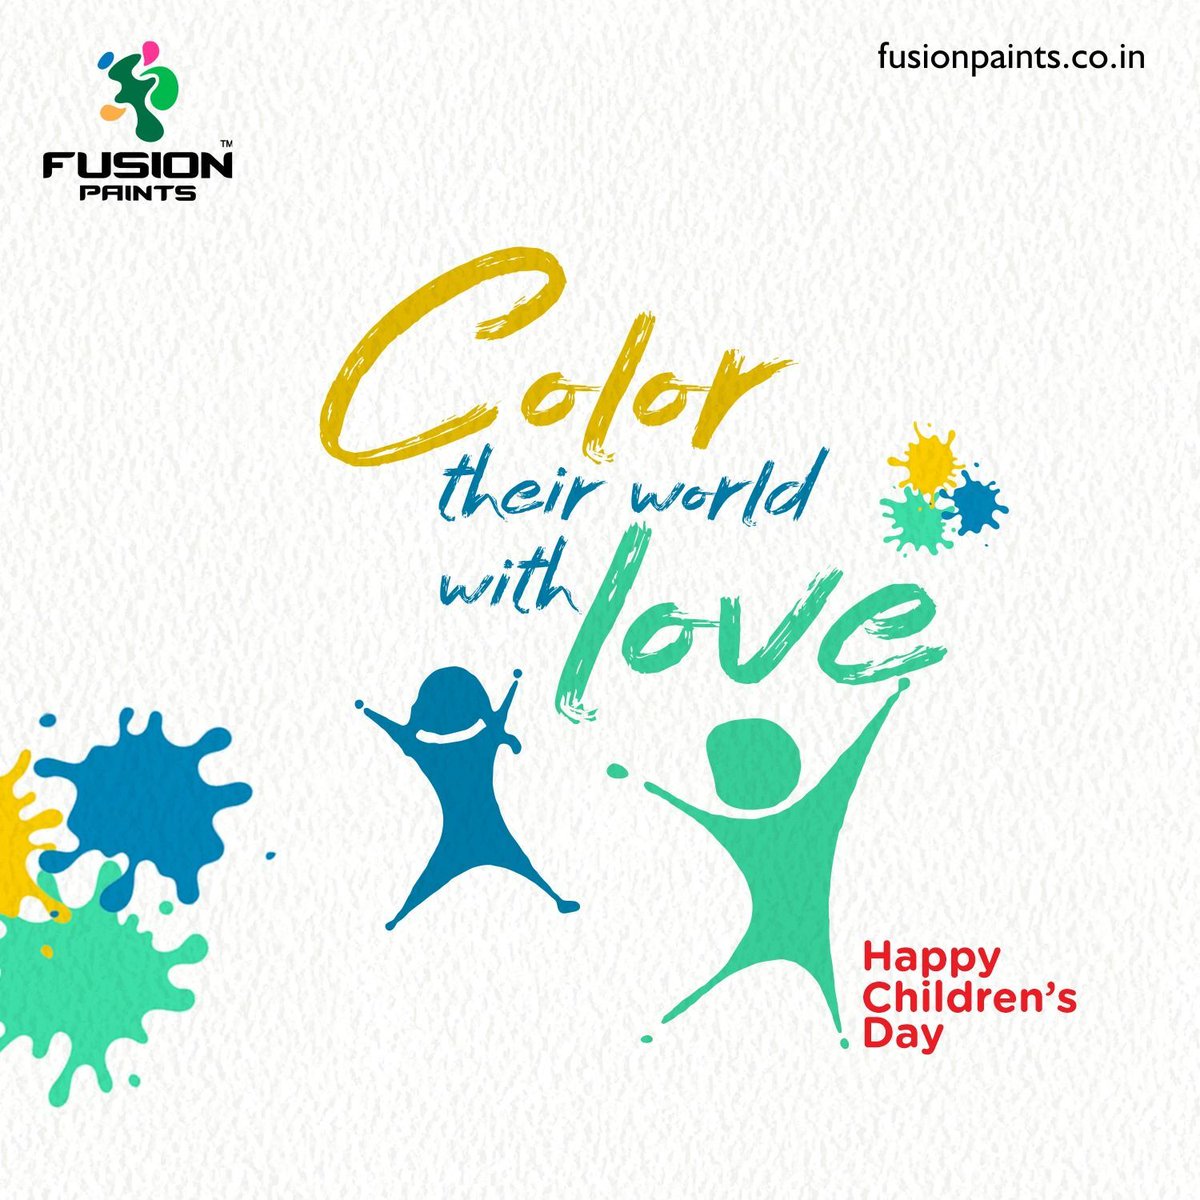 Let them fly, let them grow
Go beyond the clouds and explore the globe 

#fusionpaints #fusion #childrensday #14thnovember #children #world #flyhigh #touchsky #grow #explore #future #wallpaints #texturepaints #texturepainting #paintingideas #diwalipreparations #diwalipainting